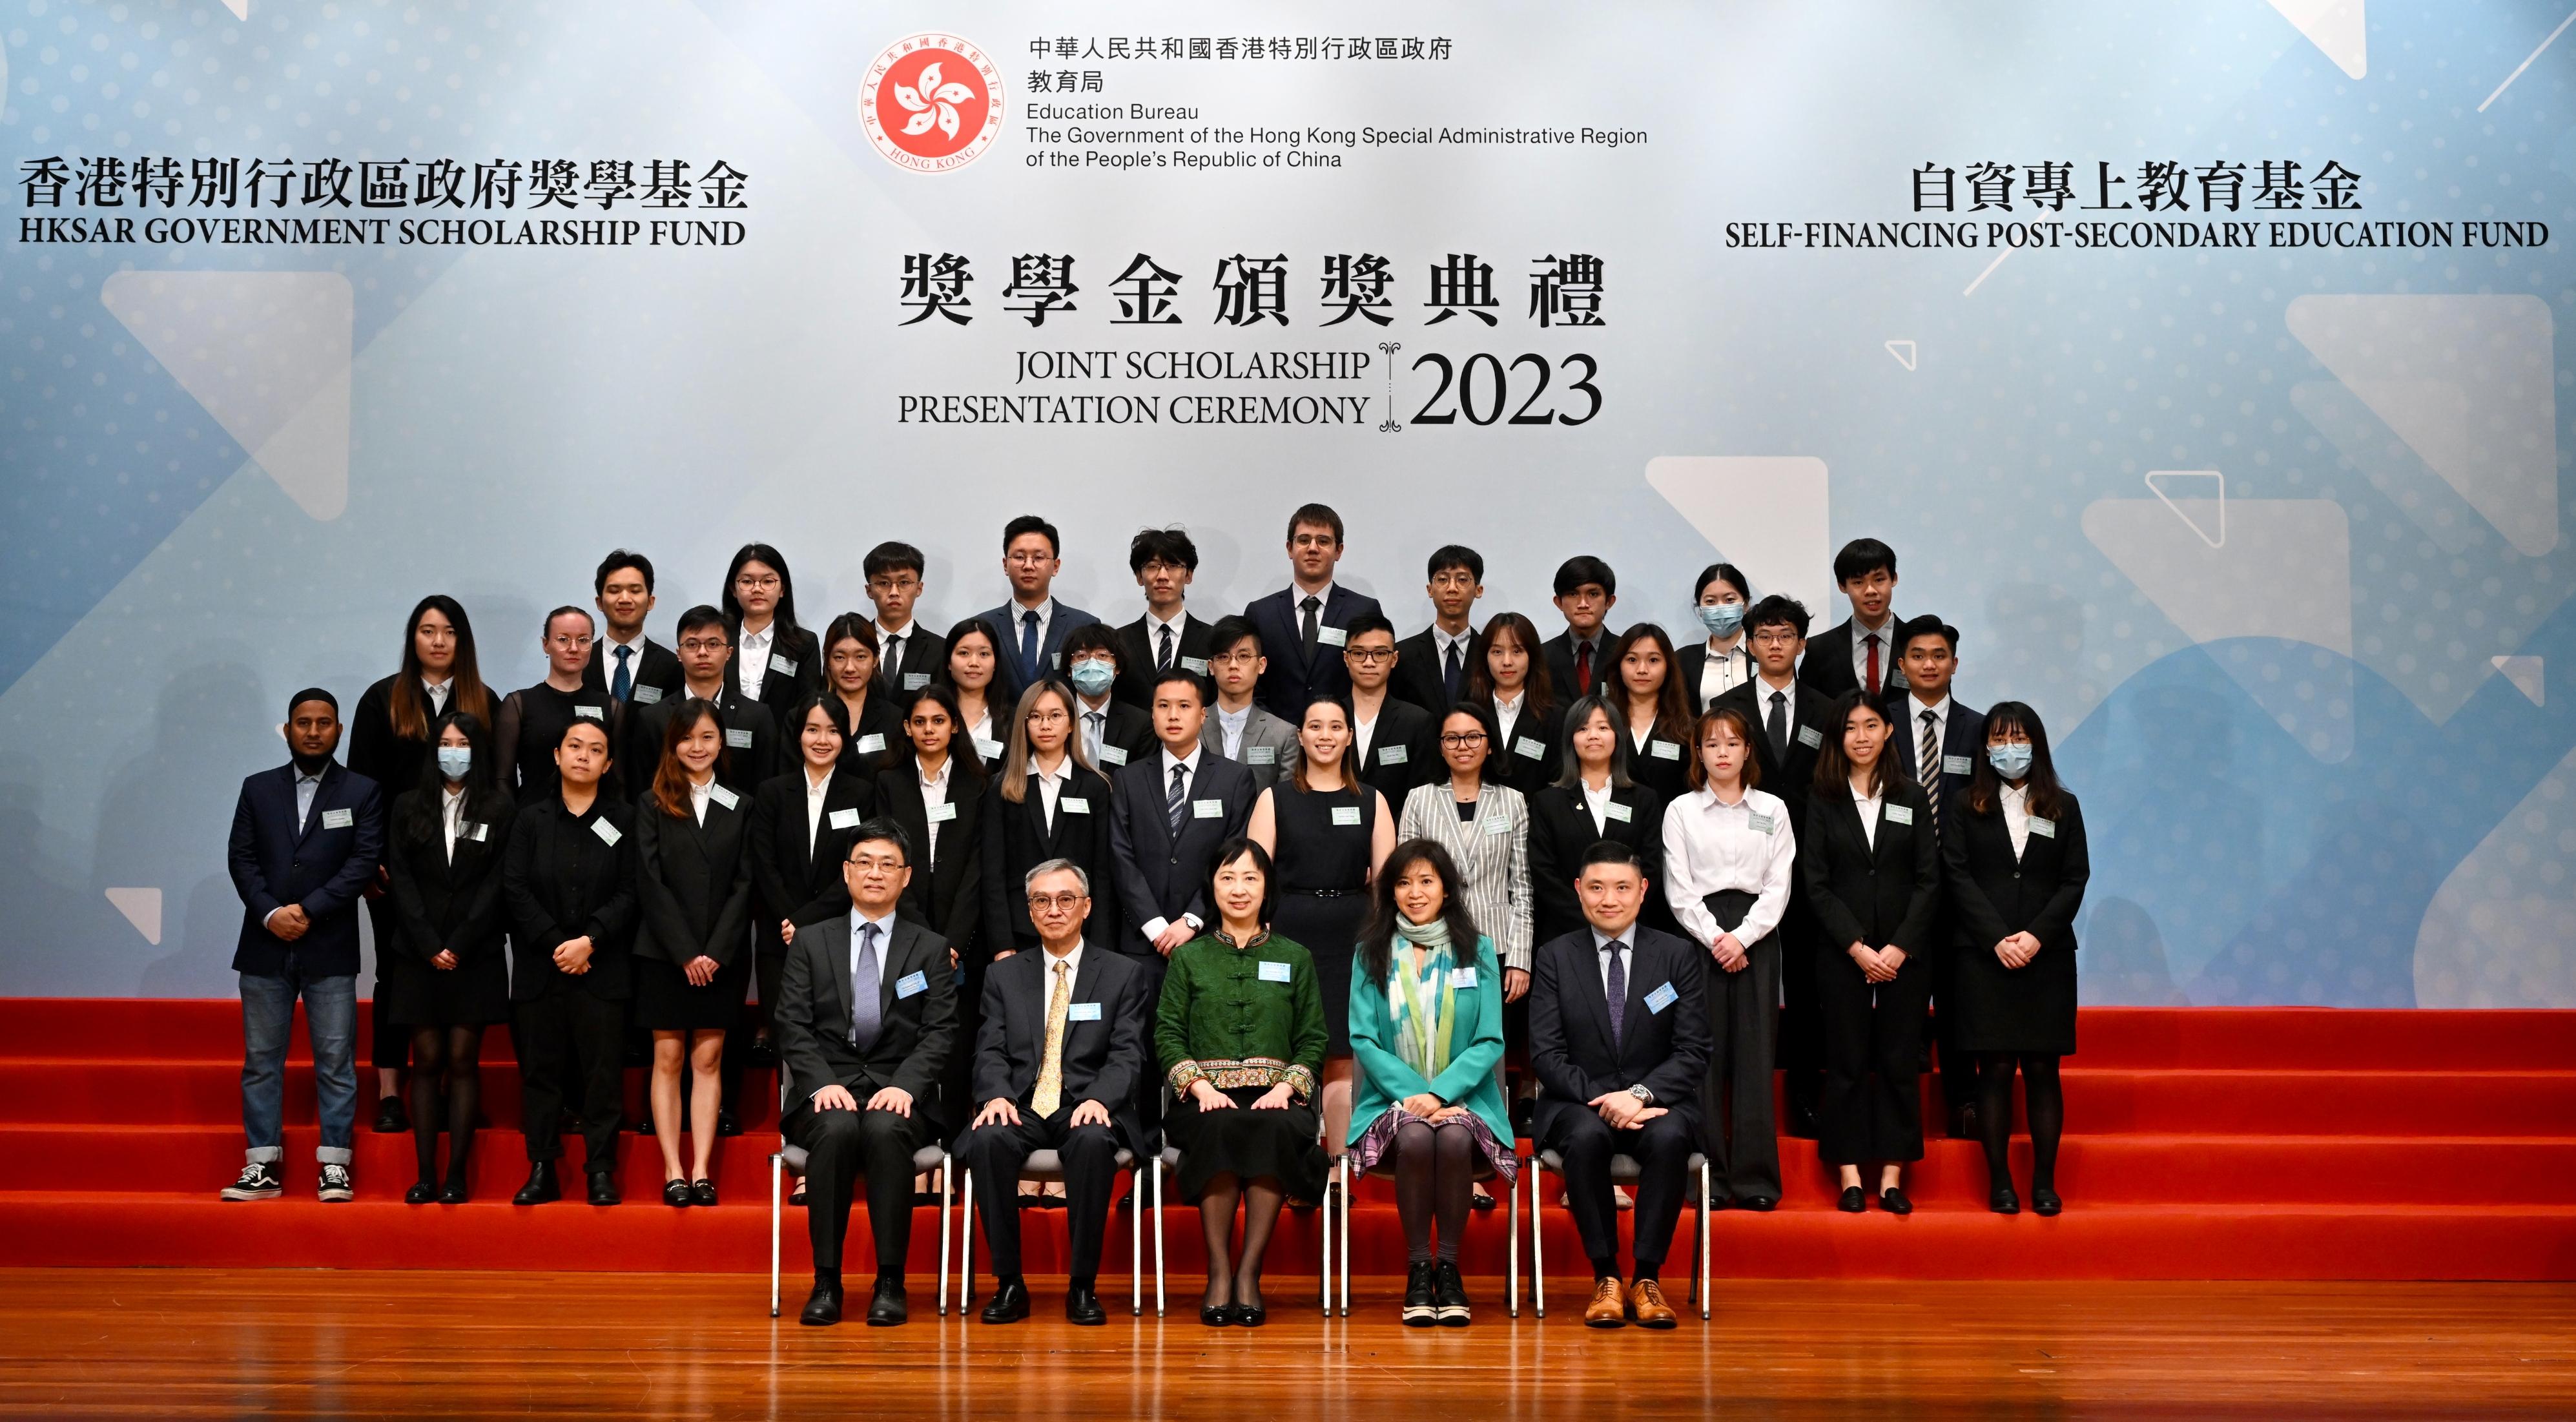 The Education Bureau held the HKSAR Government Scholarship Fund and Self-financing Post-secondary Education Fund Joint Scholarship Presentation Ceremony today (April 25). The Permanent Secretary for Education, Ms Michelle Li (front row, centre); member of the Steering Committee of the HKSAR Government Scholarship Fund, Ms Lo Po-man (front row, second right); member of the Steering Committee and the Investment Committee of the HKSAR Government Scholarship Fund, Dr Kam Pok-man (front row, second left), and other guests are pictured with students who are awarded scholarships under the HKSAR Government Scholarship Fund.